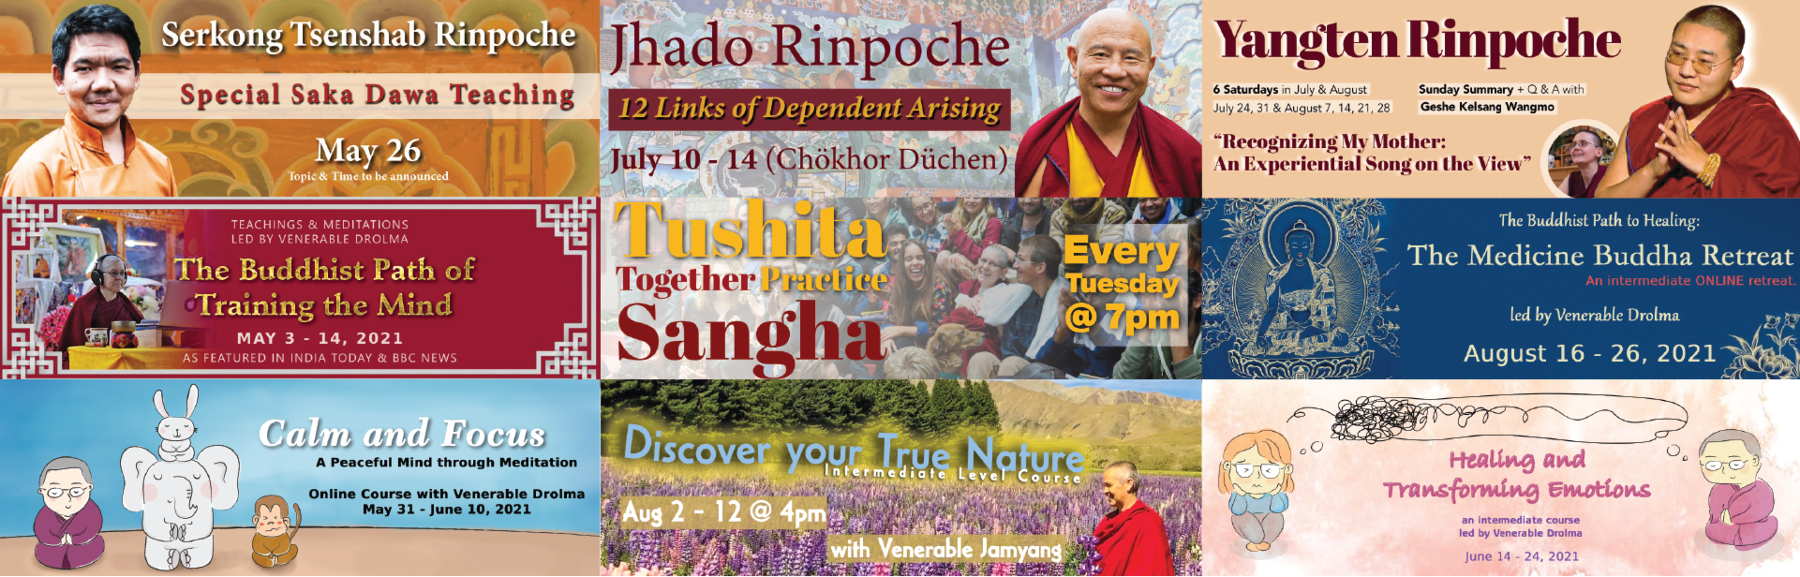 Saka Dawa & Teachings with 3 Rinpoches & more courses May to August